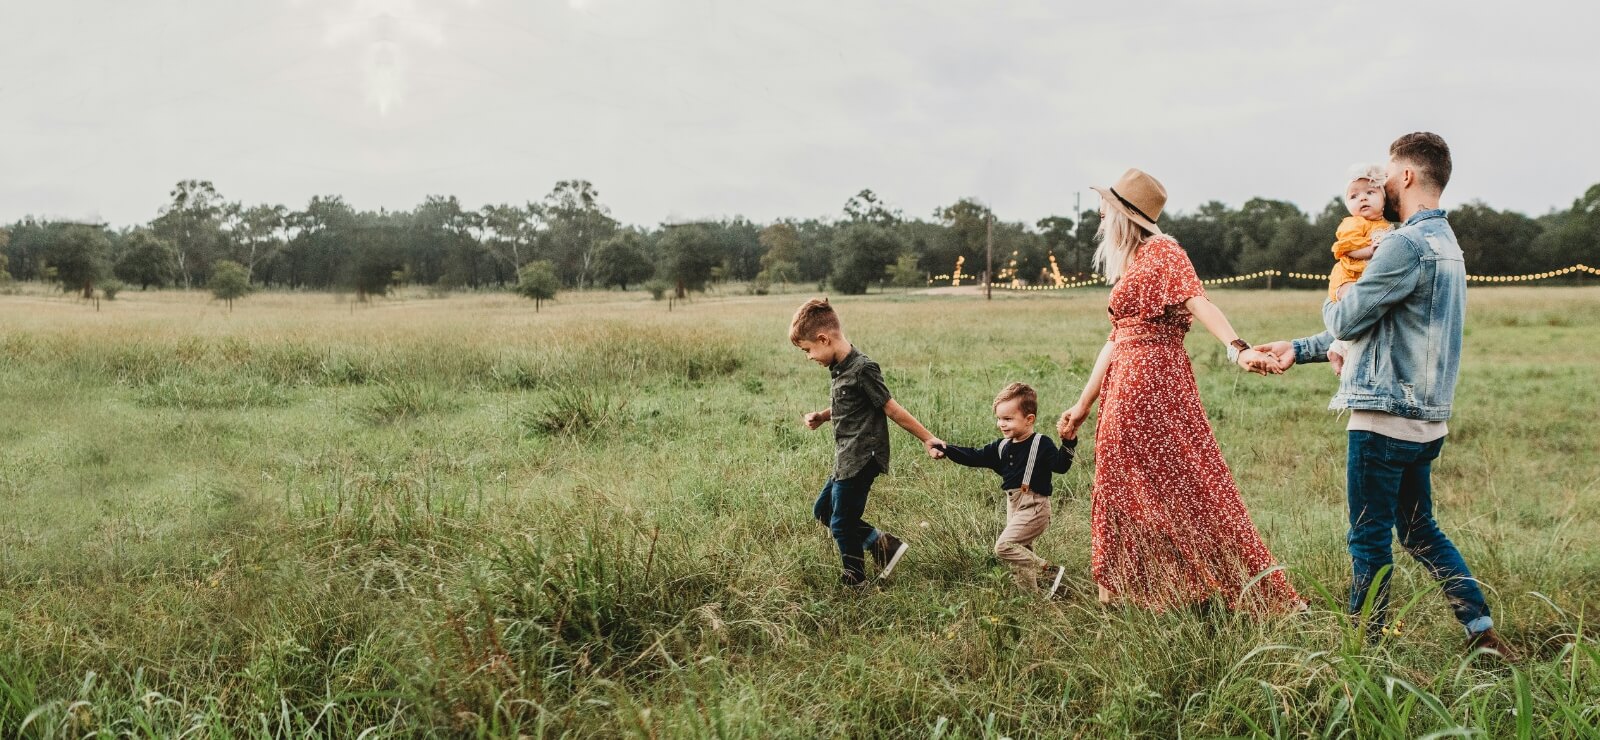 family walking through a field while holding hands